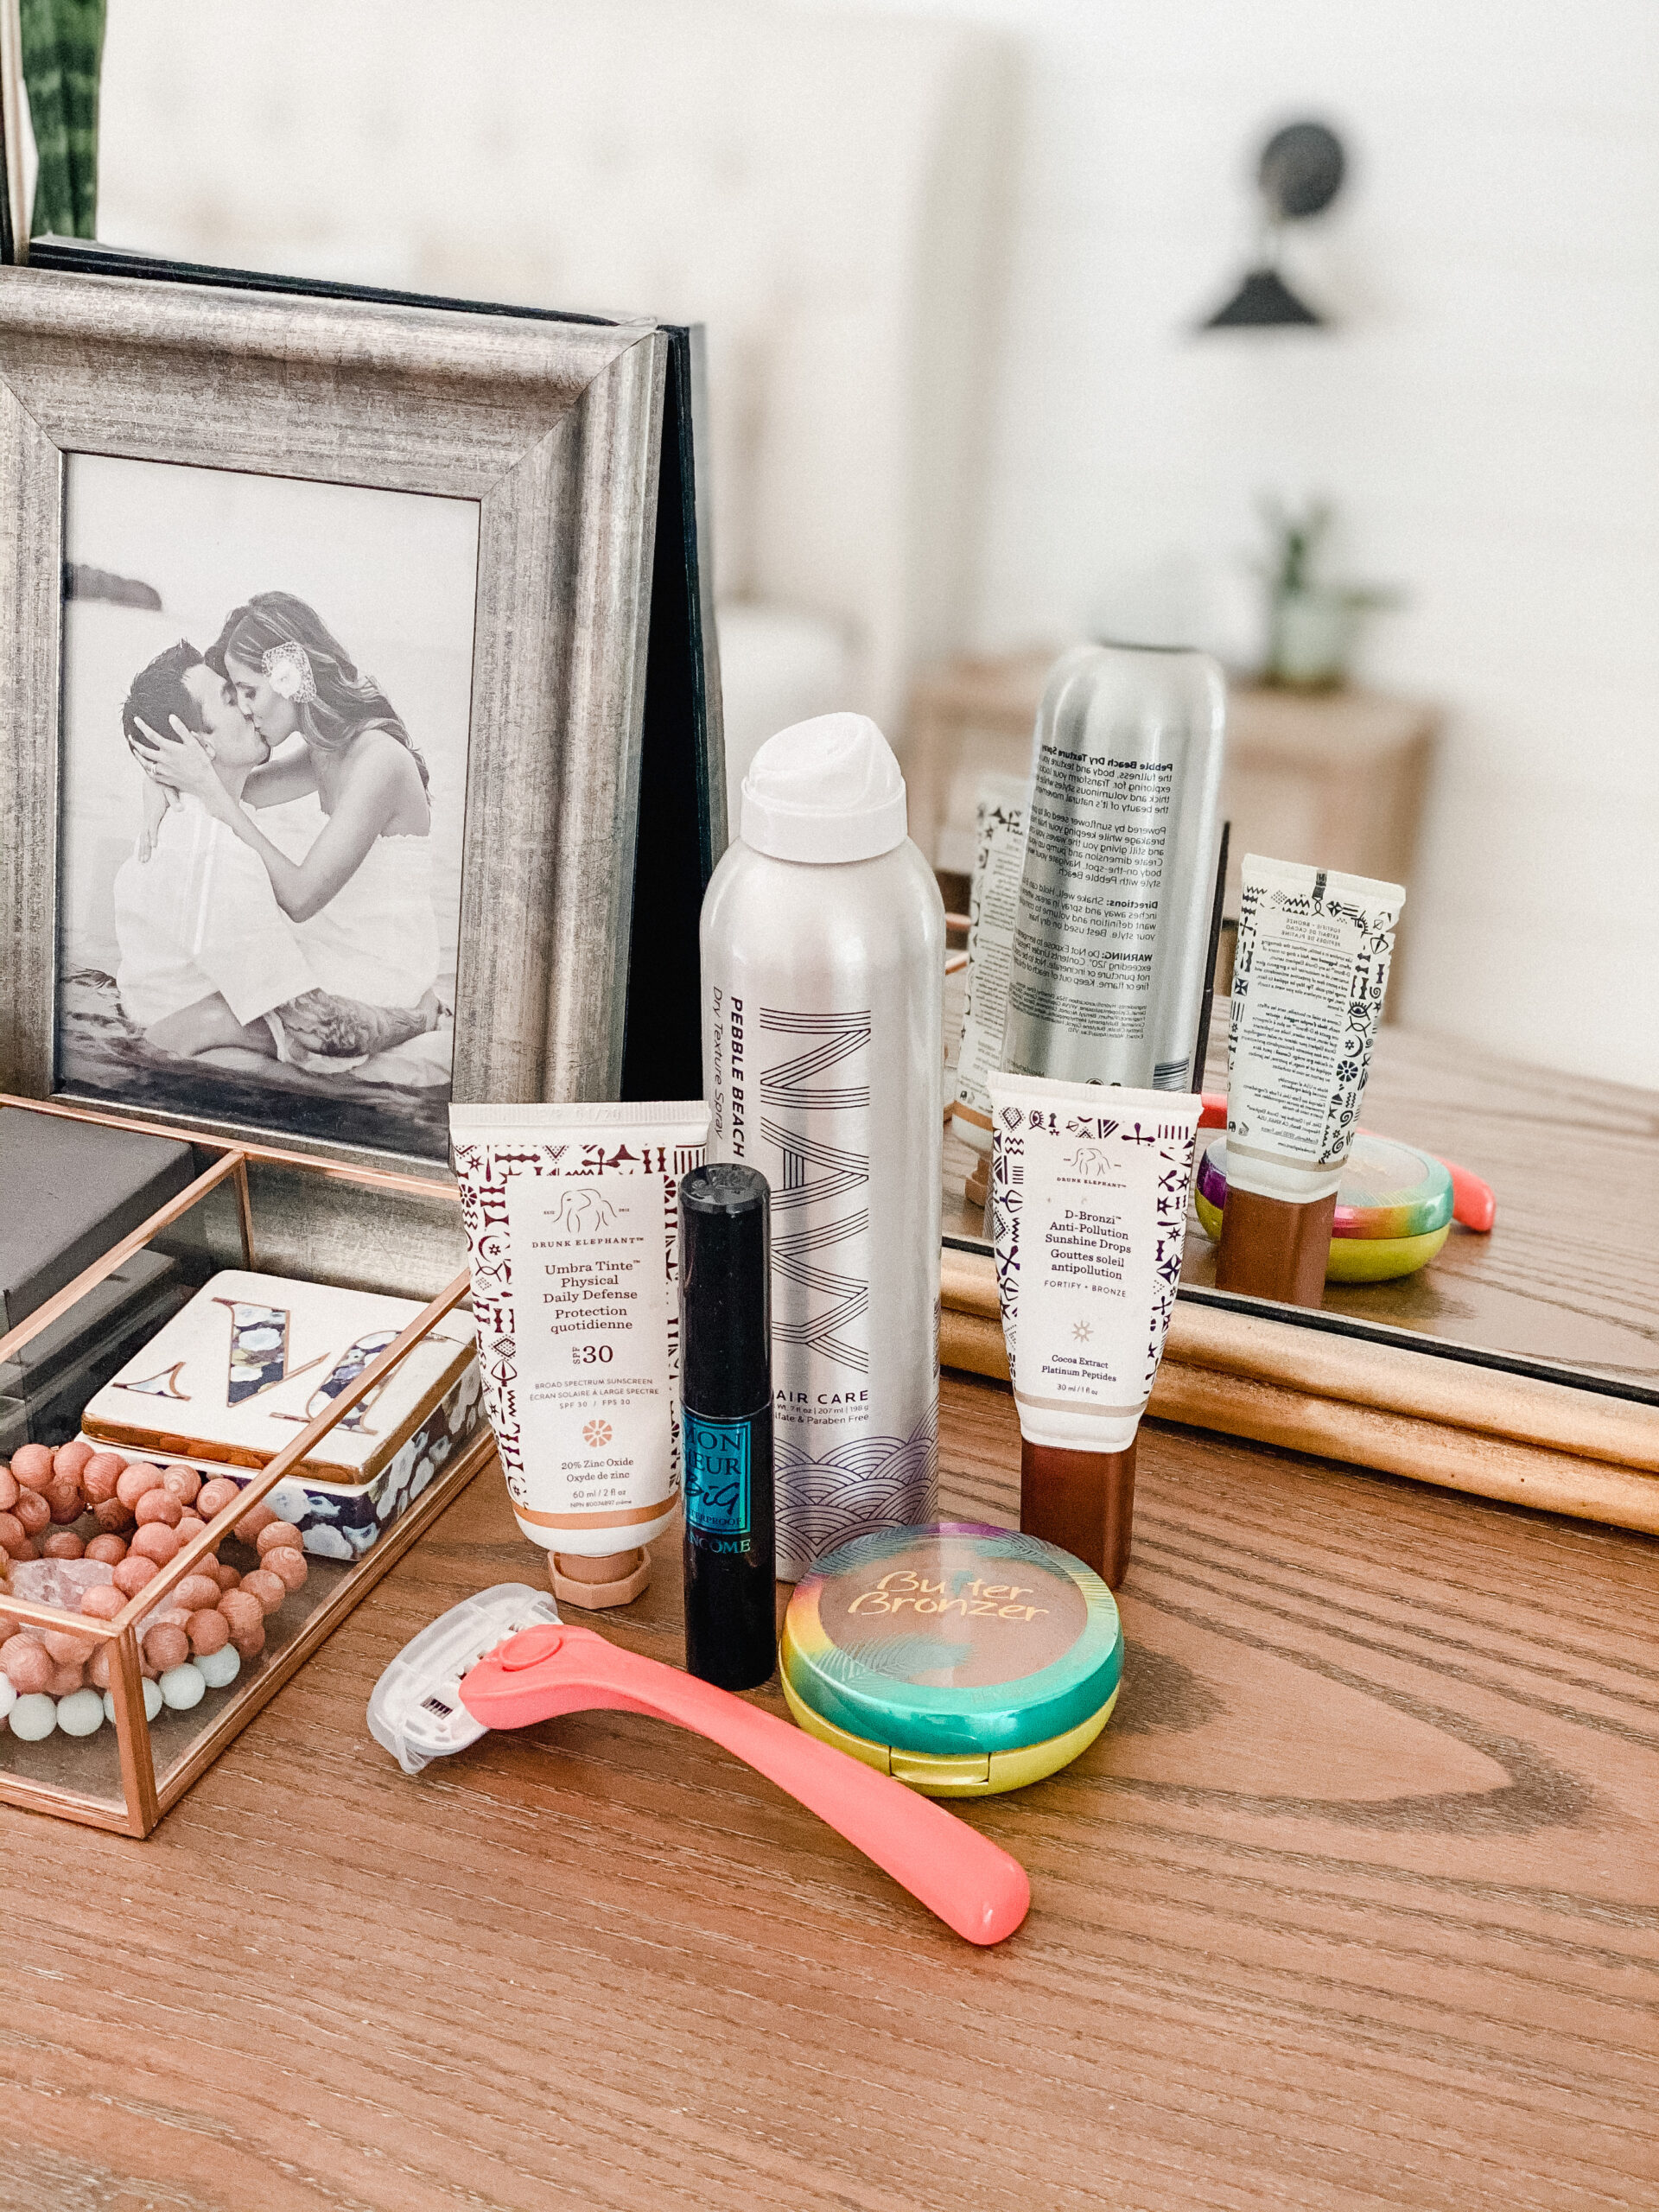 Connecticut life and style blogger Lauren McBride shares her summer beauty favorites, including makeup, skincare, hair care, and body products.